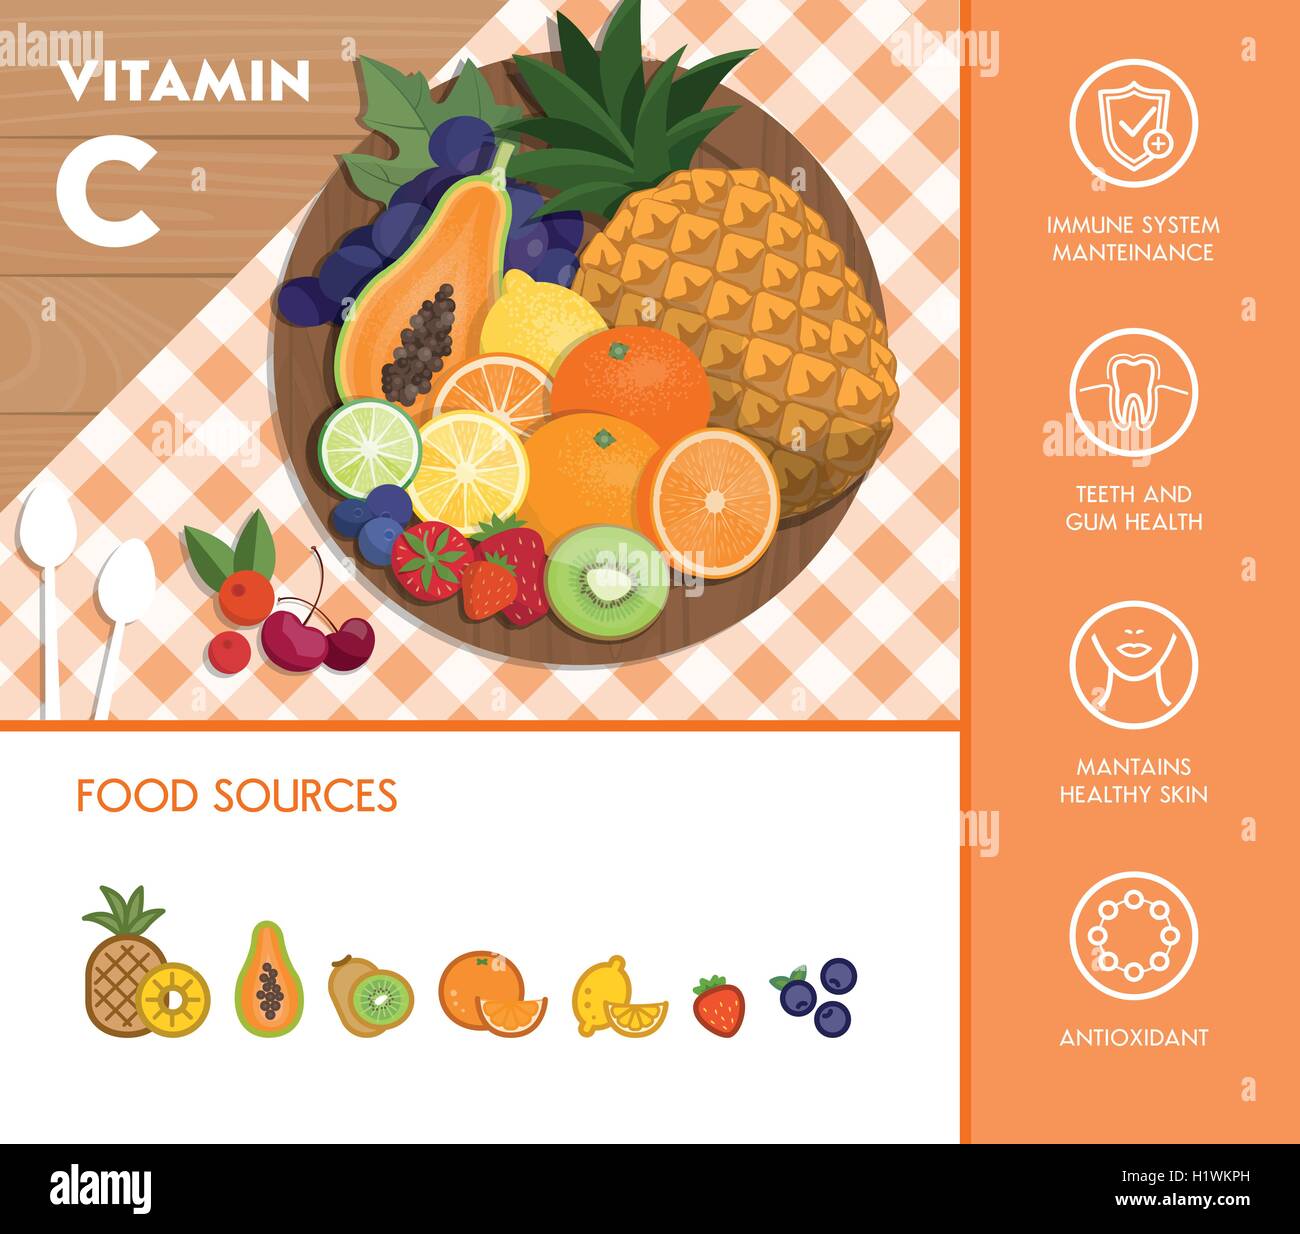 Vitamin C food sources and health benefits, vegetables and fruit composition on a chopping board and icons set Stock Vector